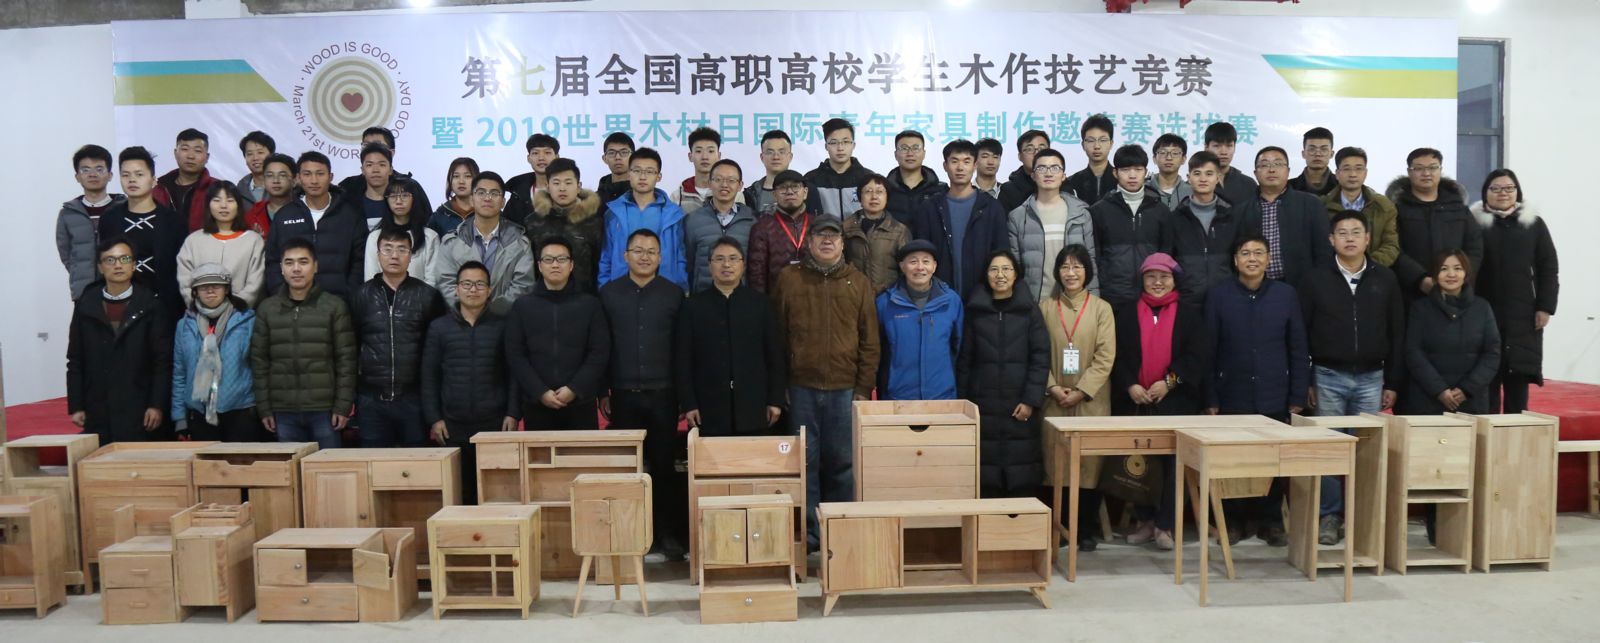 7th National Vocational & College Student Carpentry Skills Competition